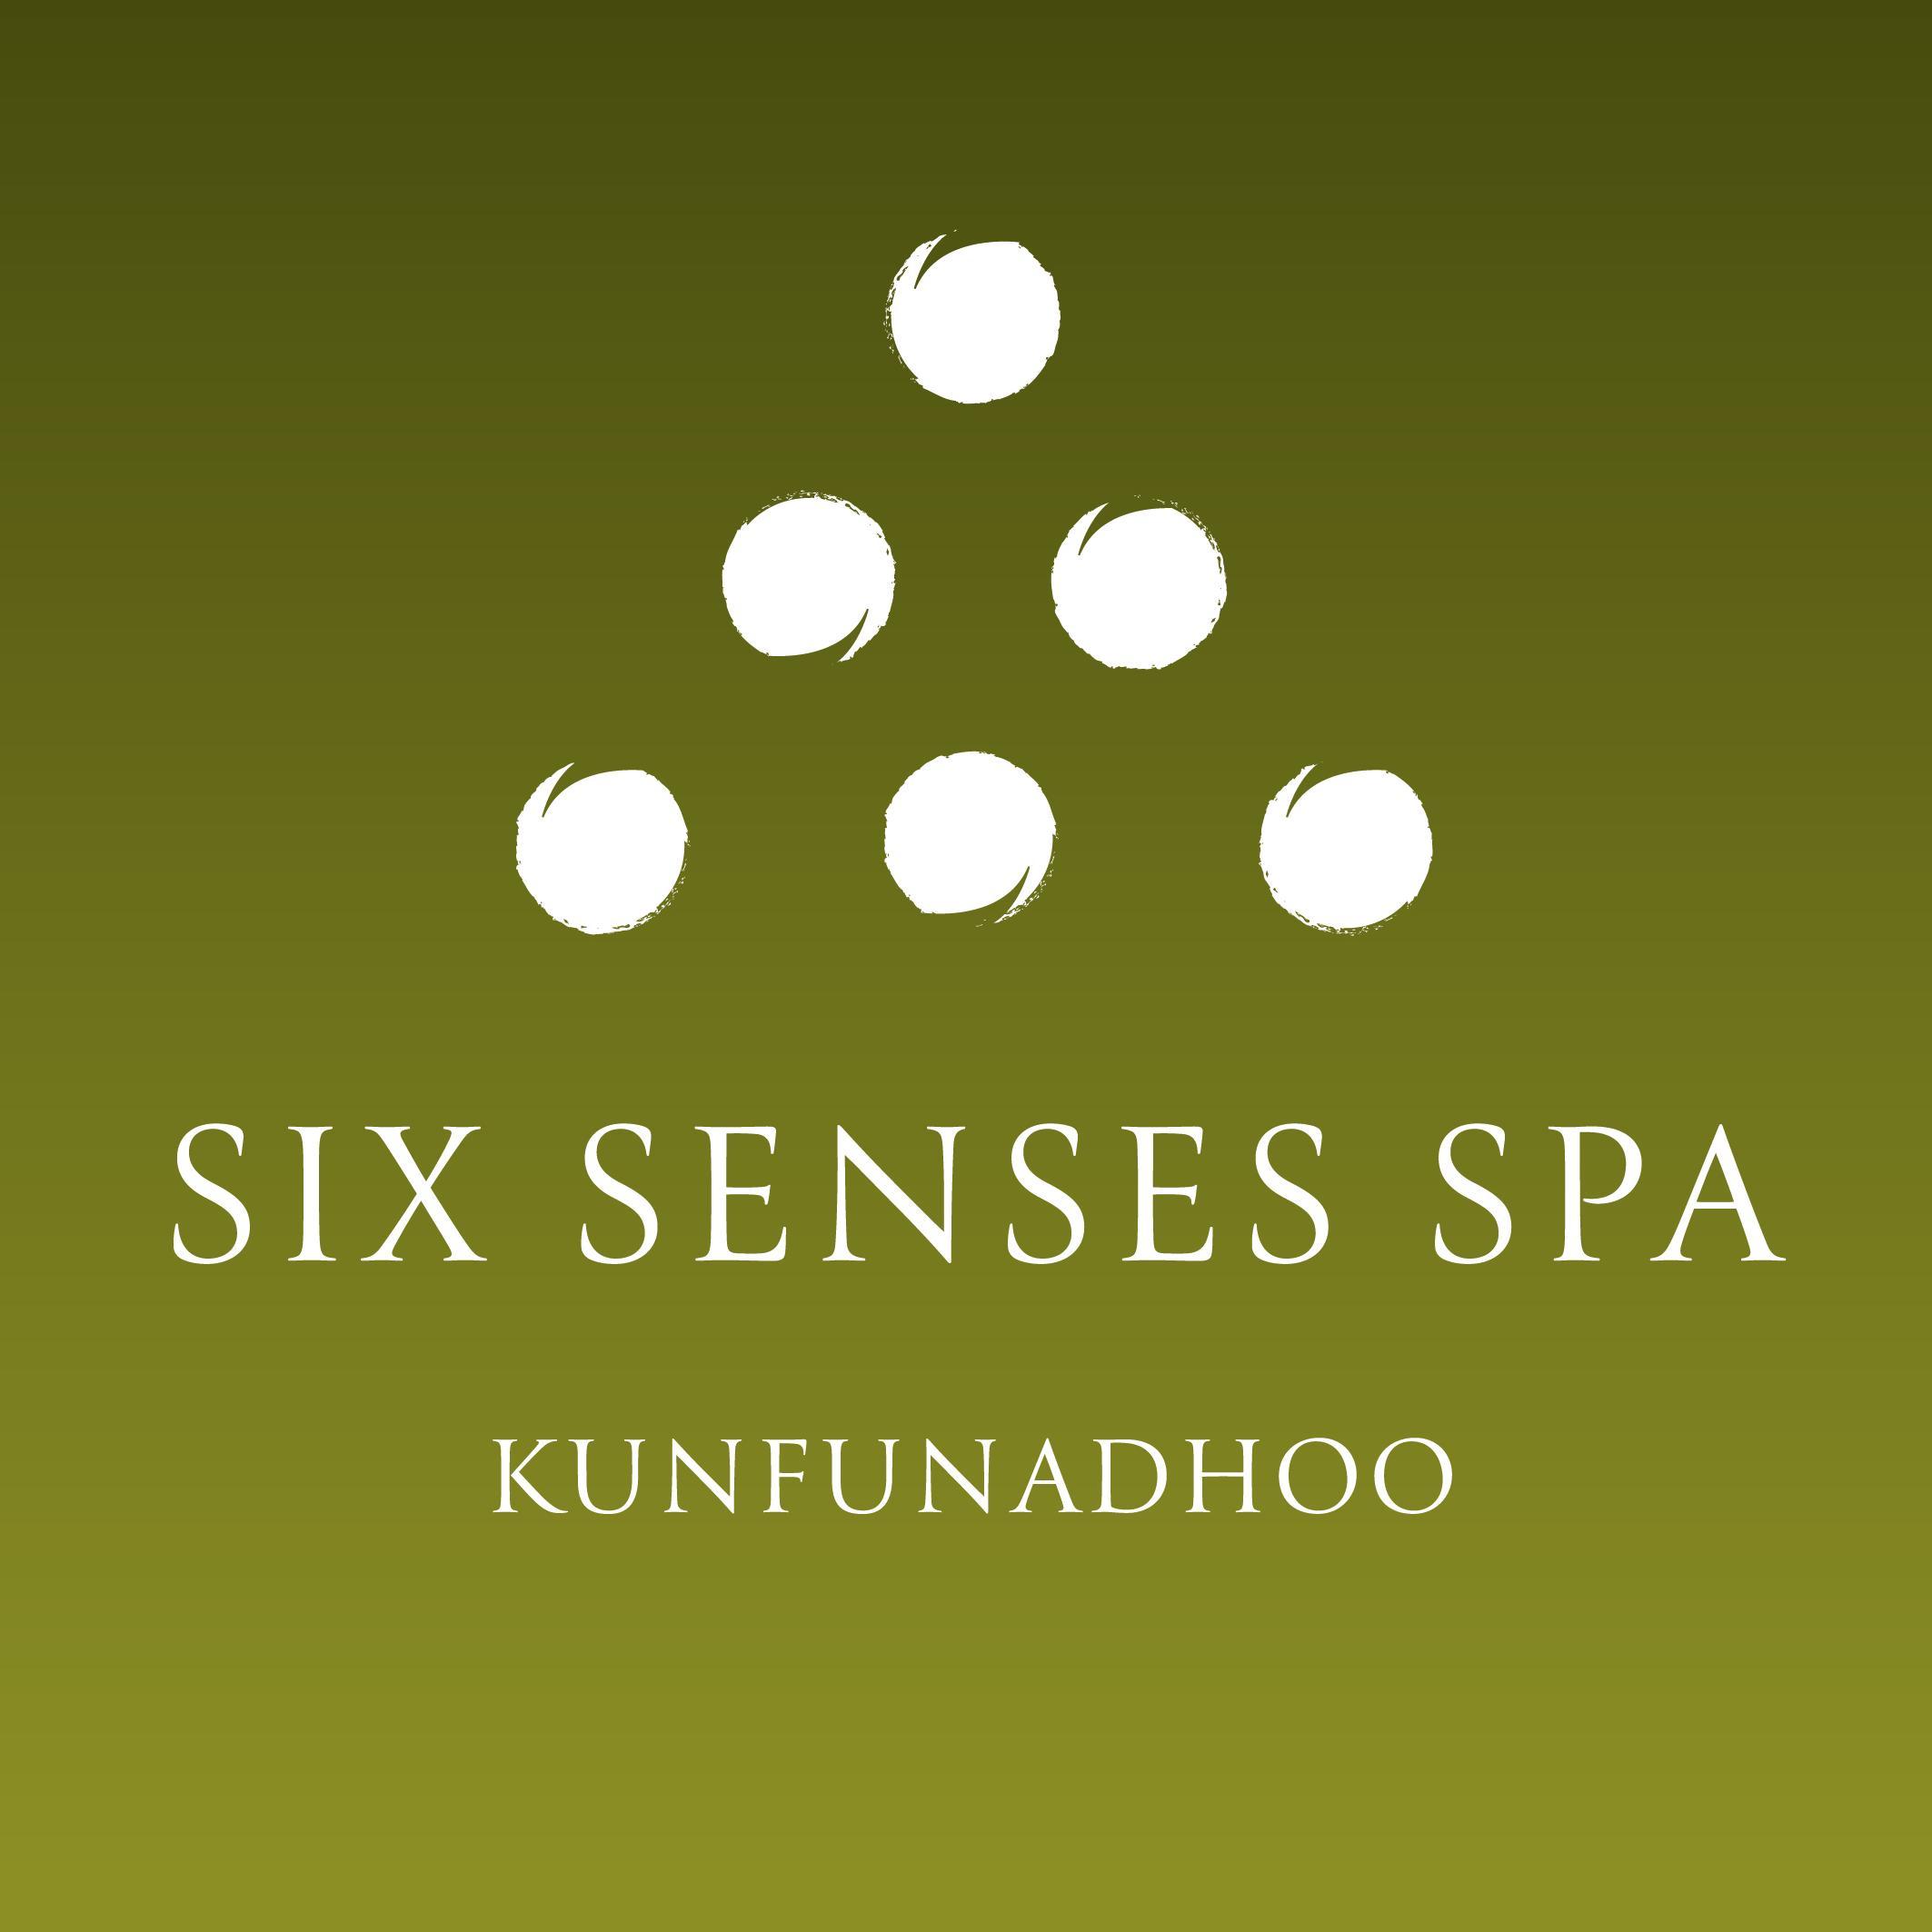 A rejunvenating combination of invigorating wellness facilities and talented therapists; delivering a variety of healing, beauty and pampering treatments.